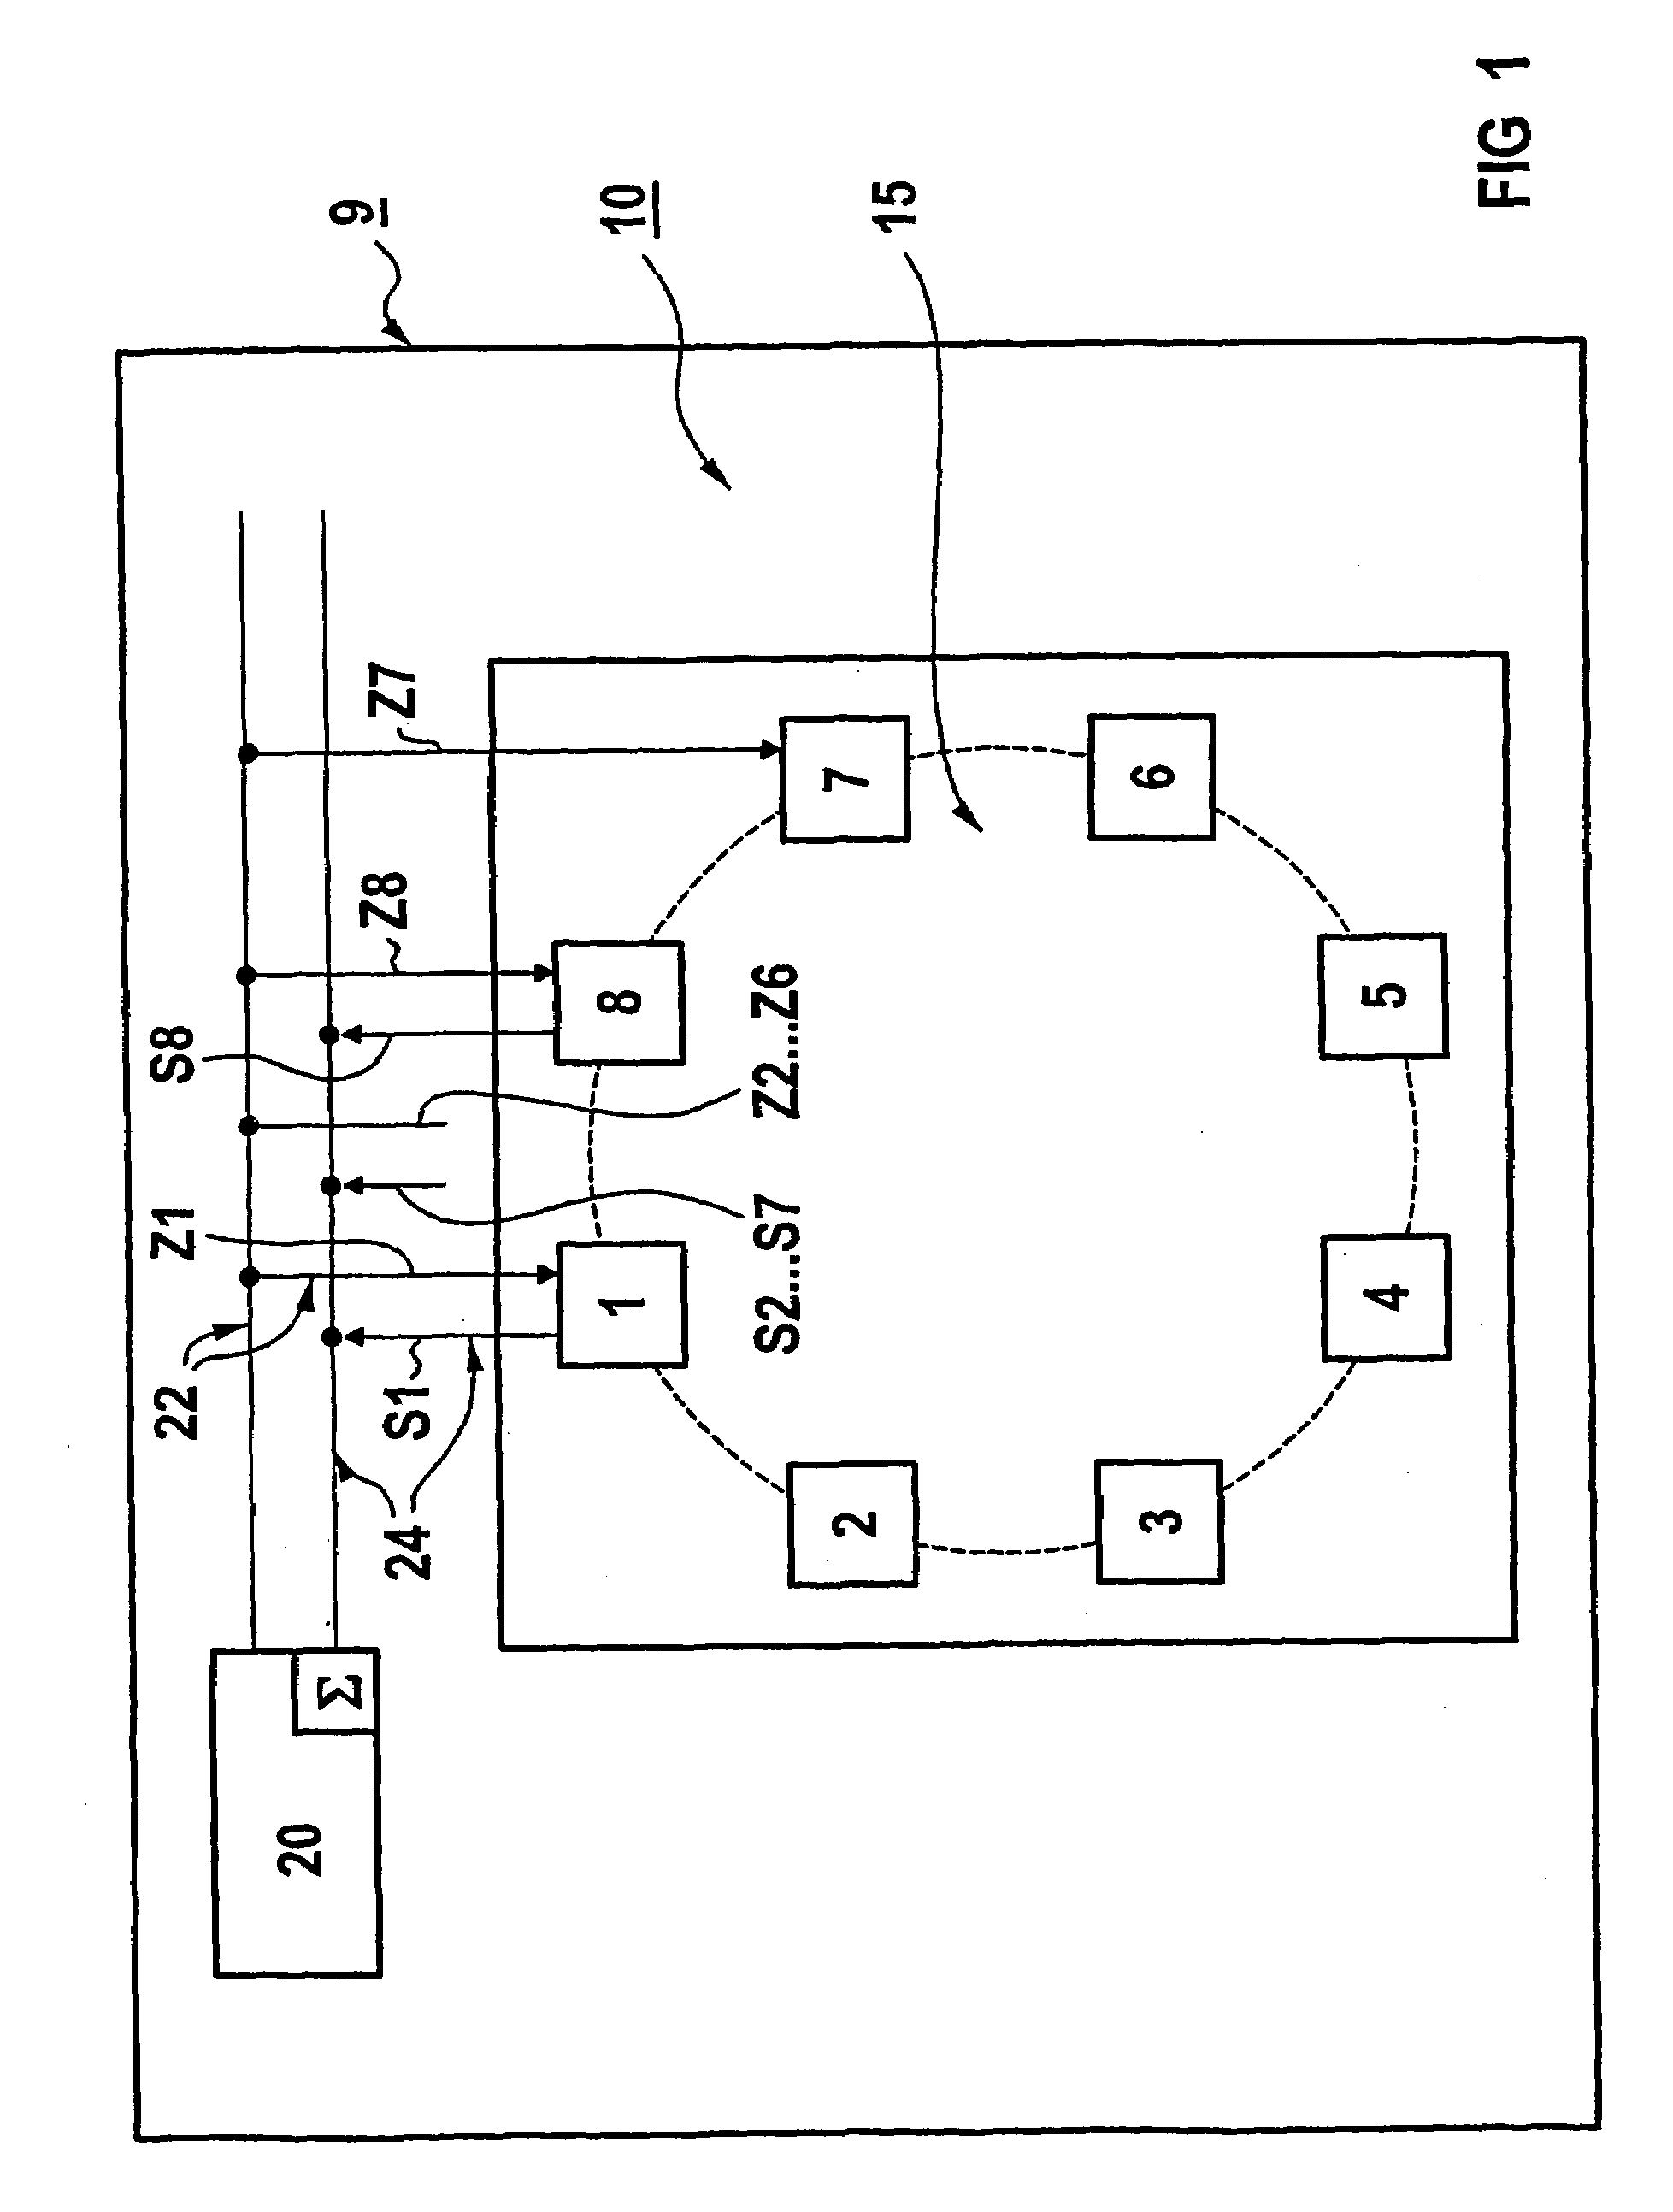 Method and device for operating a multiple component technical system, particularly a combustion system for producing electrical energy